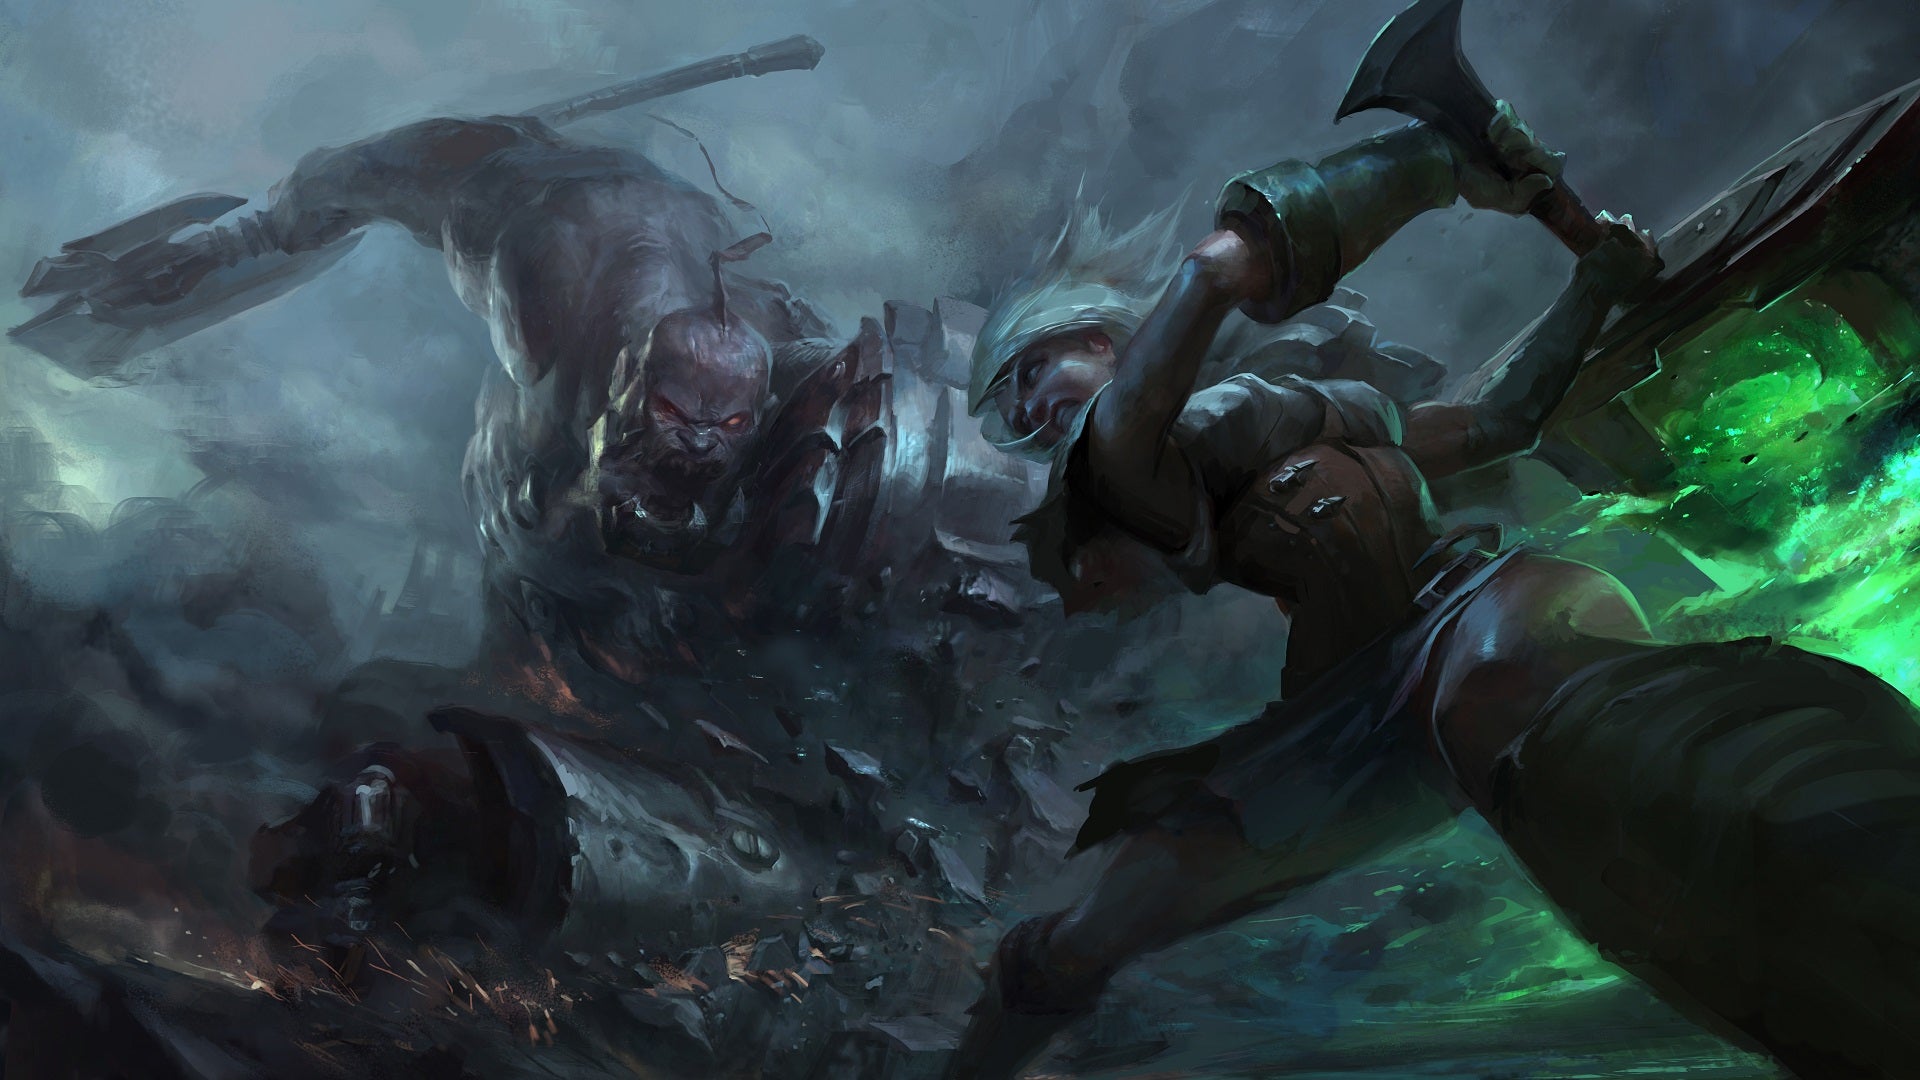 Sion and Riven from League of Legends fighting